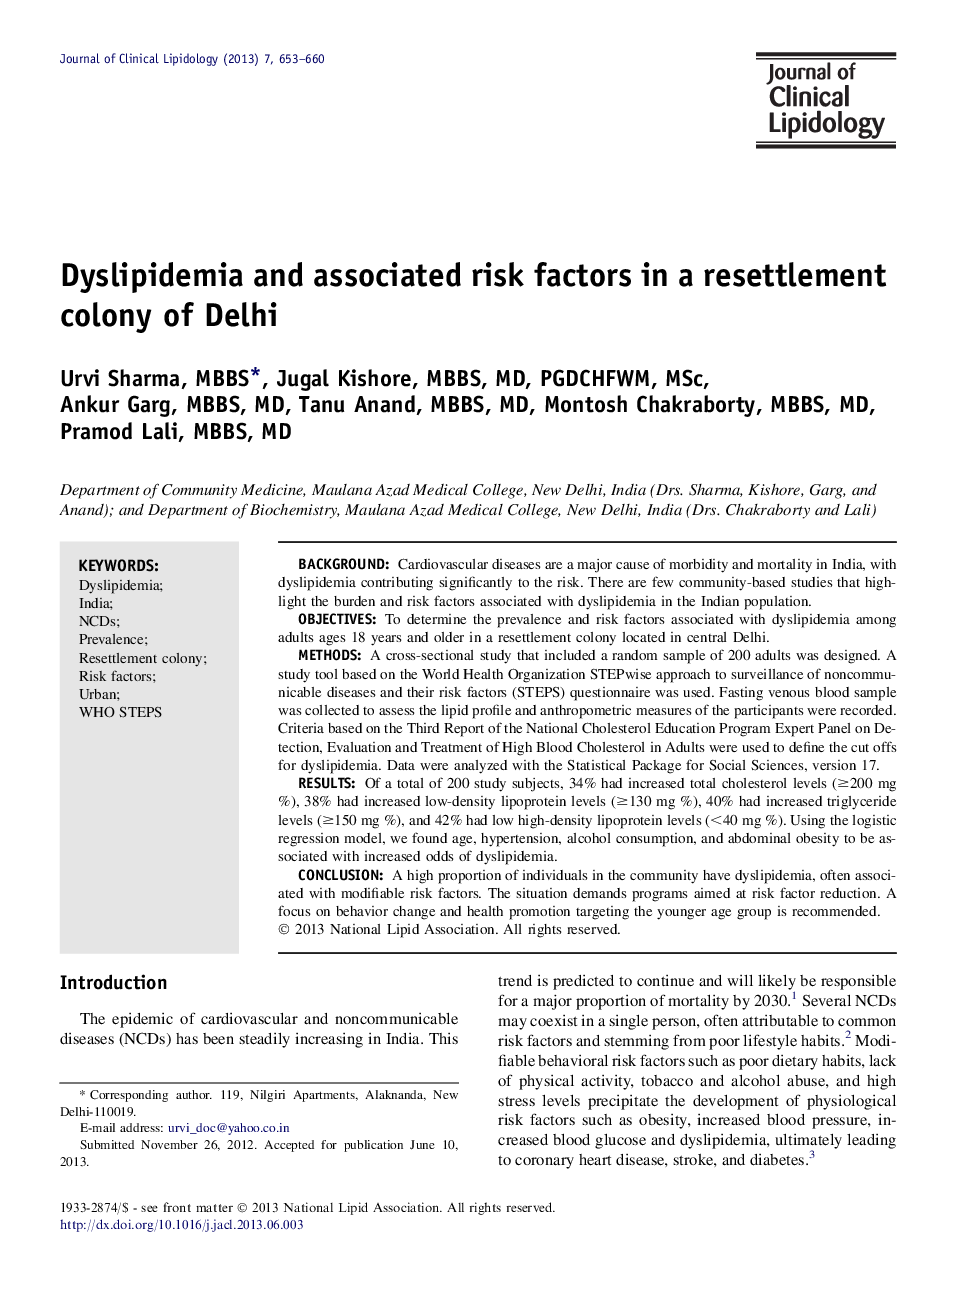 Dyslipidemia and associated risk factors in a resettlement colony of Delhi